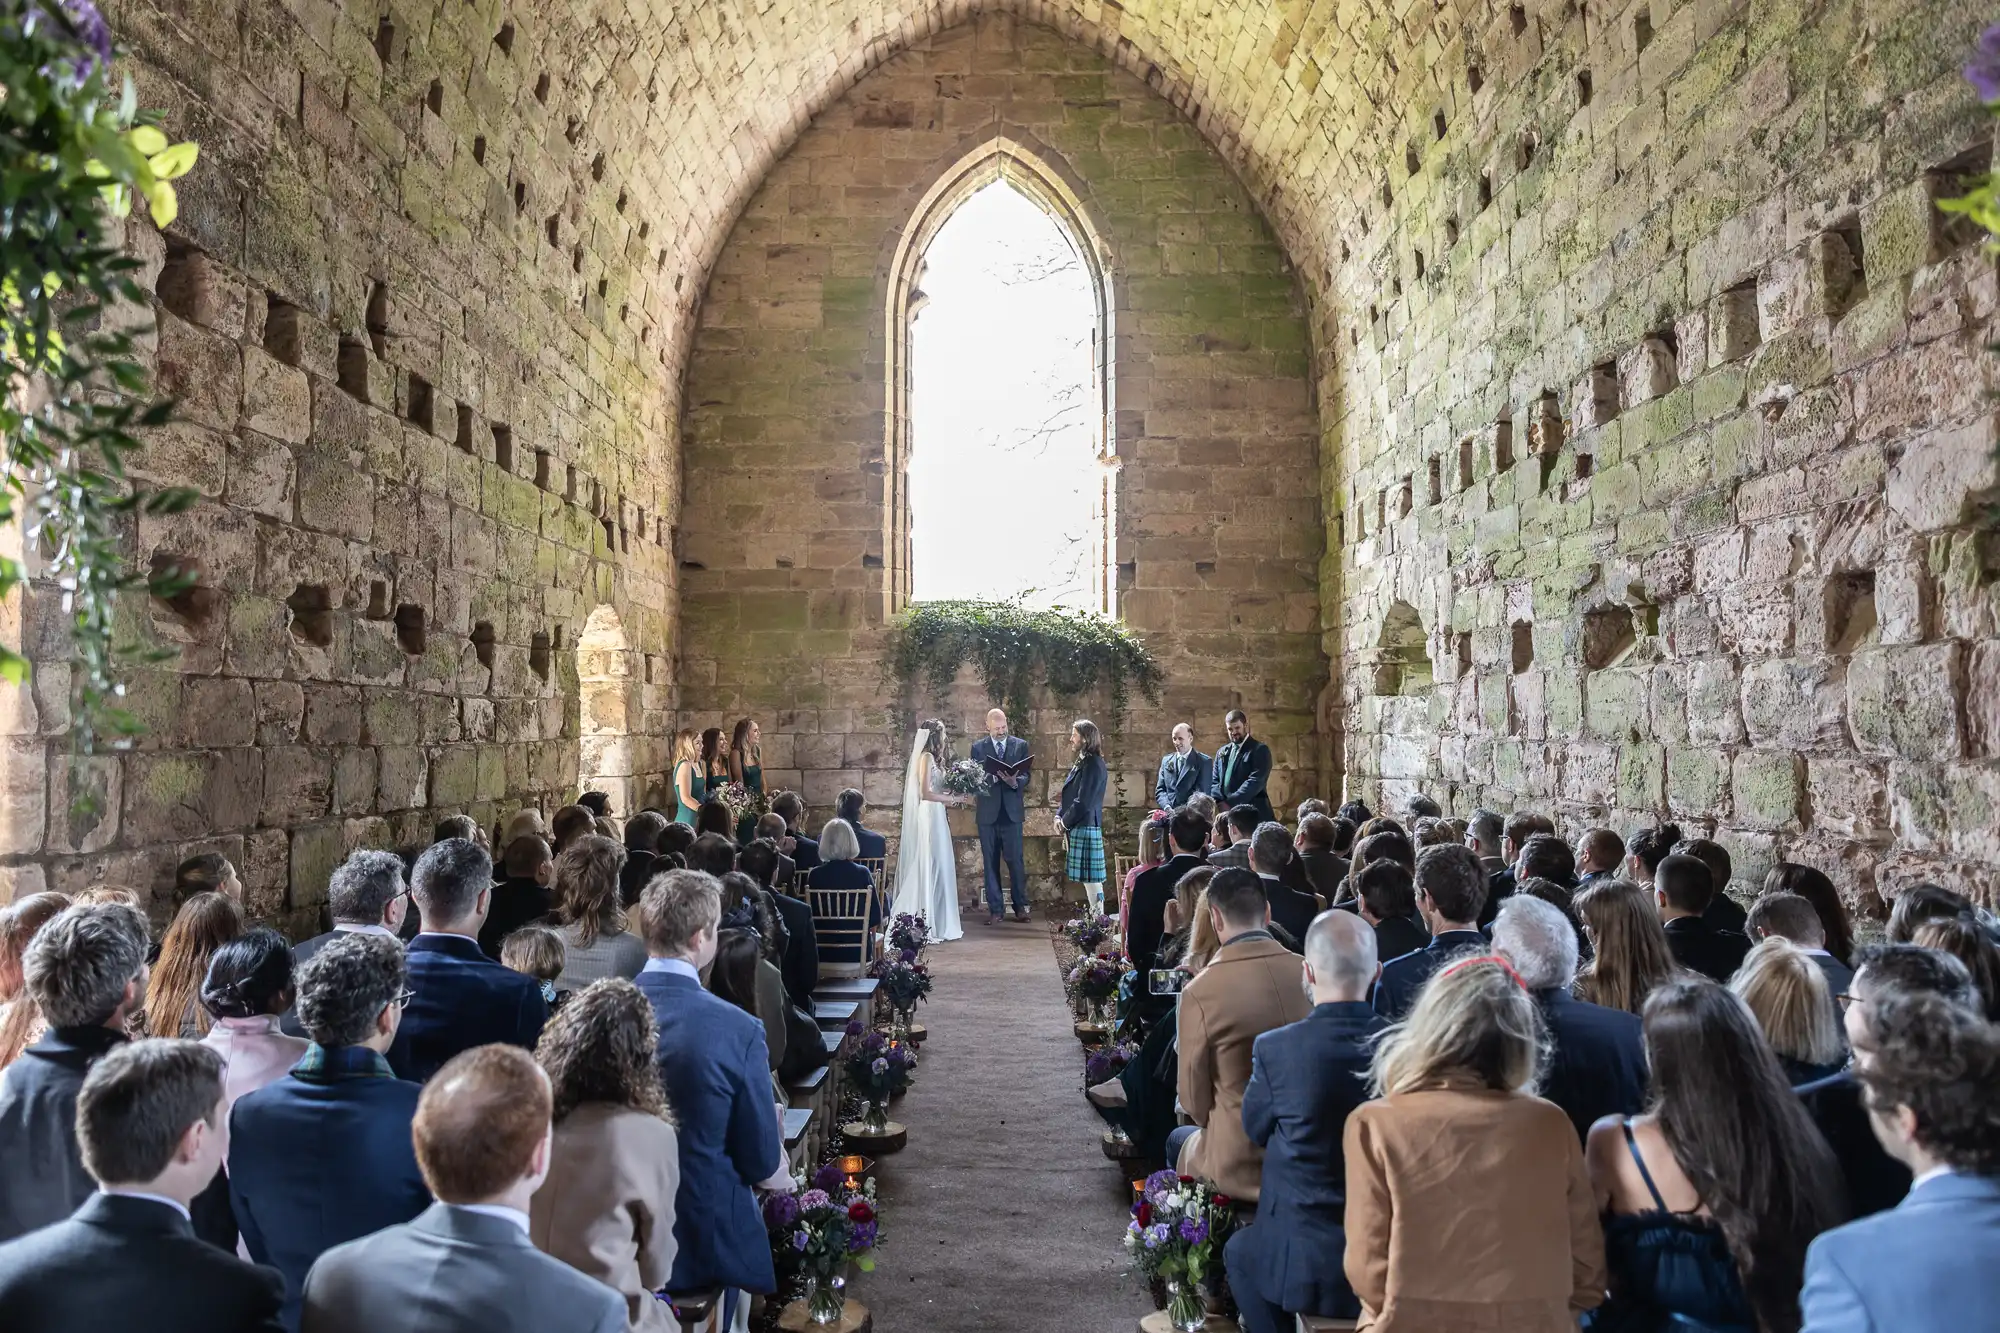 A wedding ceremony inside a stone chapel with high arched ceilings. Guests are seated on either side of a central aisle, and the couple stands before officiants near a large window.